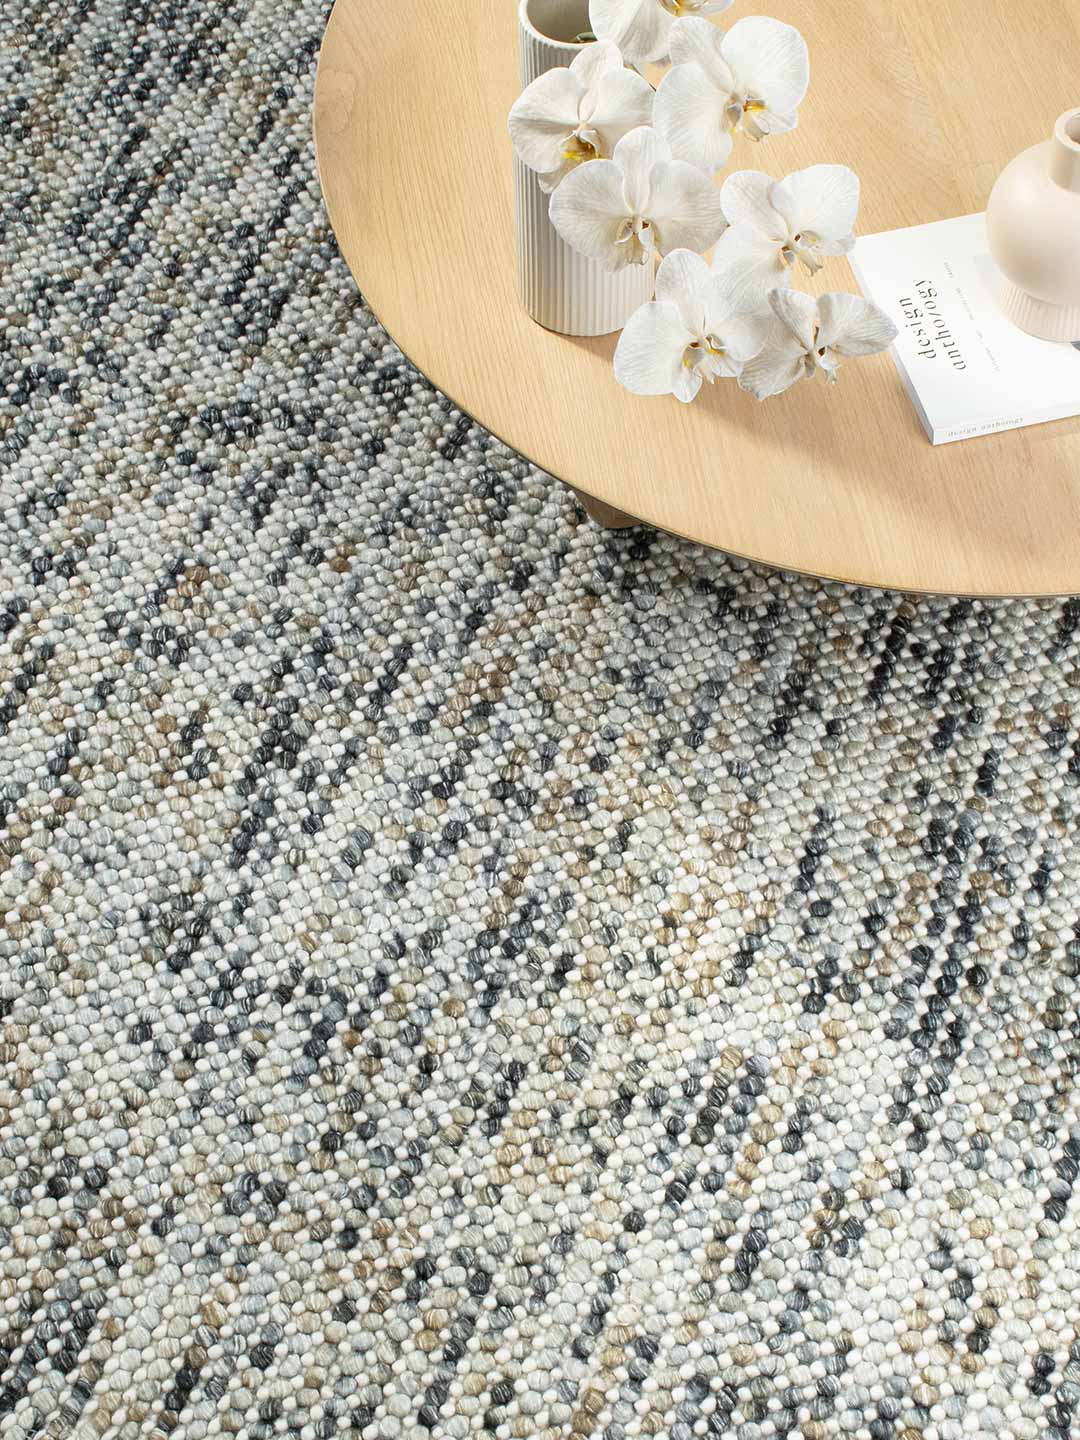 Magic Mineral grey/mustard yellow textured rug handwoven in wool - lifestyle image